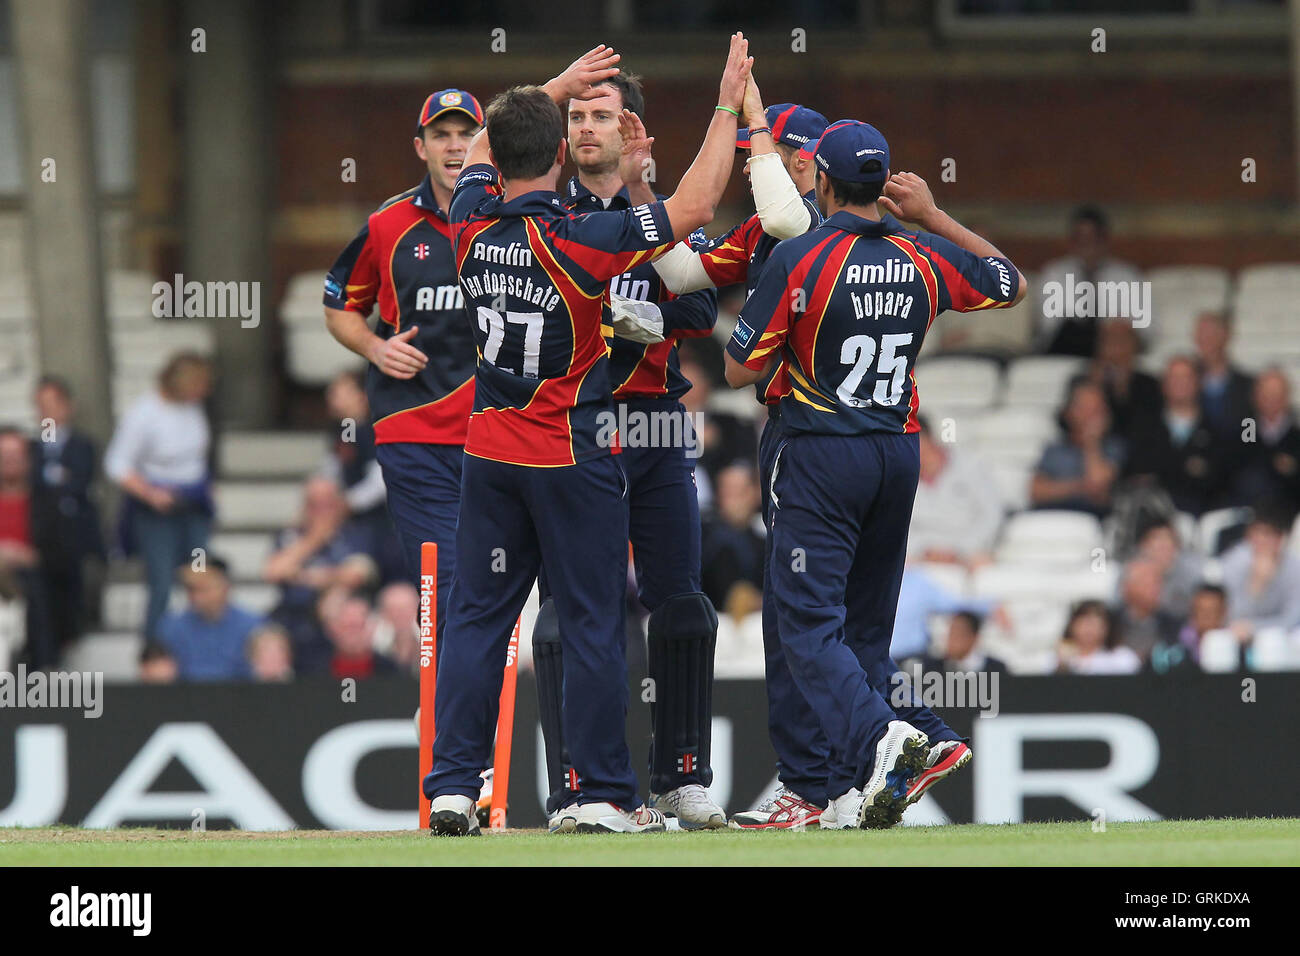 Essex players celebrate the wicket of Matthew Spriegel - Surrey Lions vs Essex Eagles - Friends Life T20 South Division Cricket at the Kia Oval,London - 13/06/12. Stock Photo